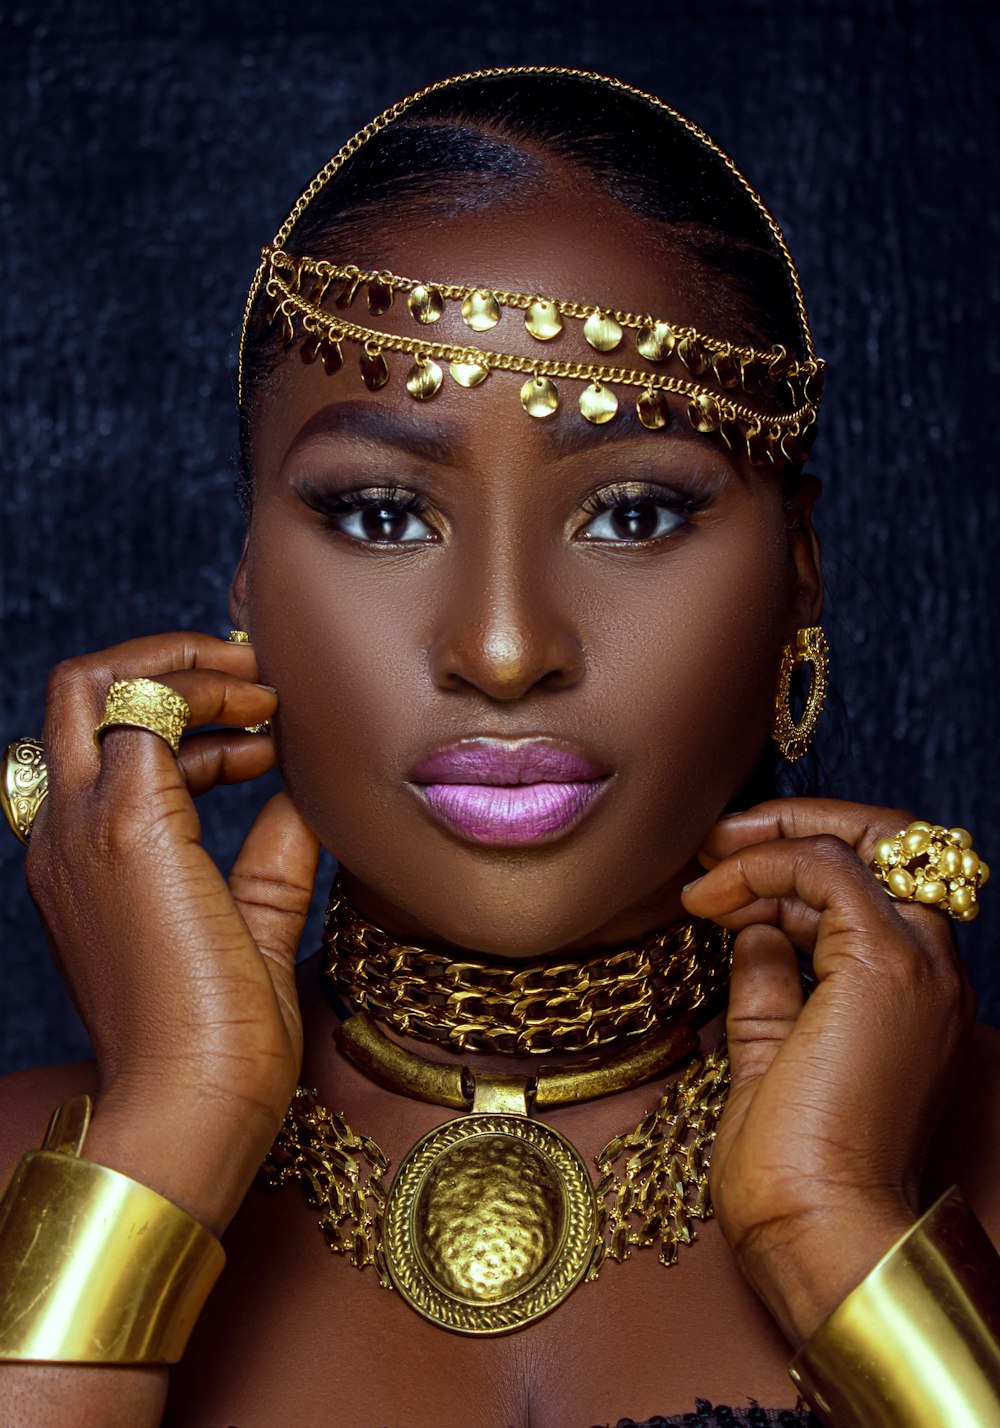 a woman wearing gold jewelry and a head piece